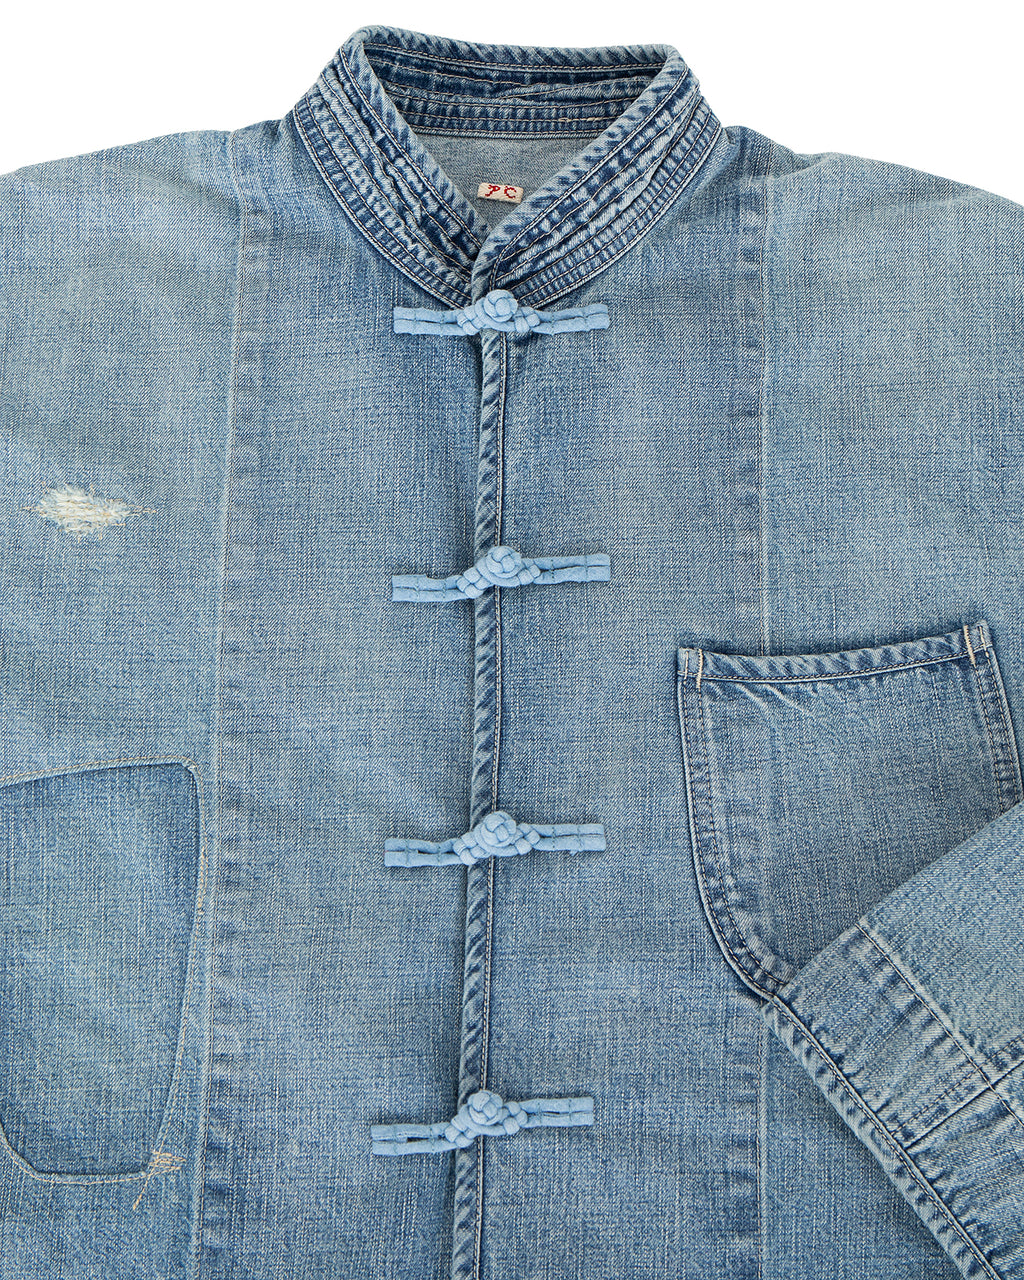 Porter Classic Cannery Row Denim Chinese Jacket